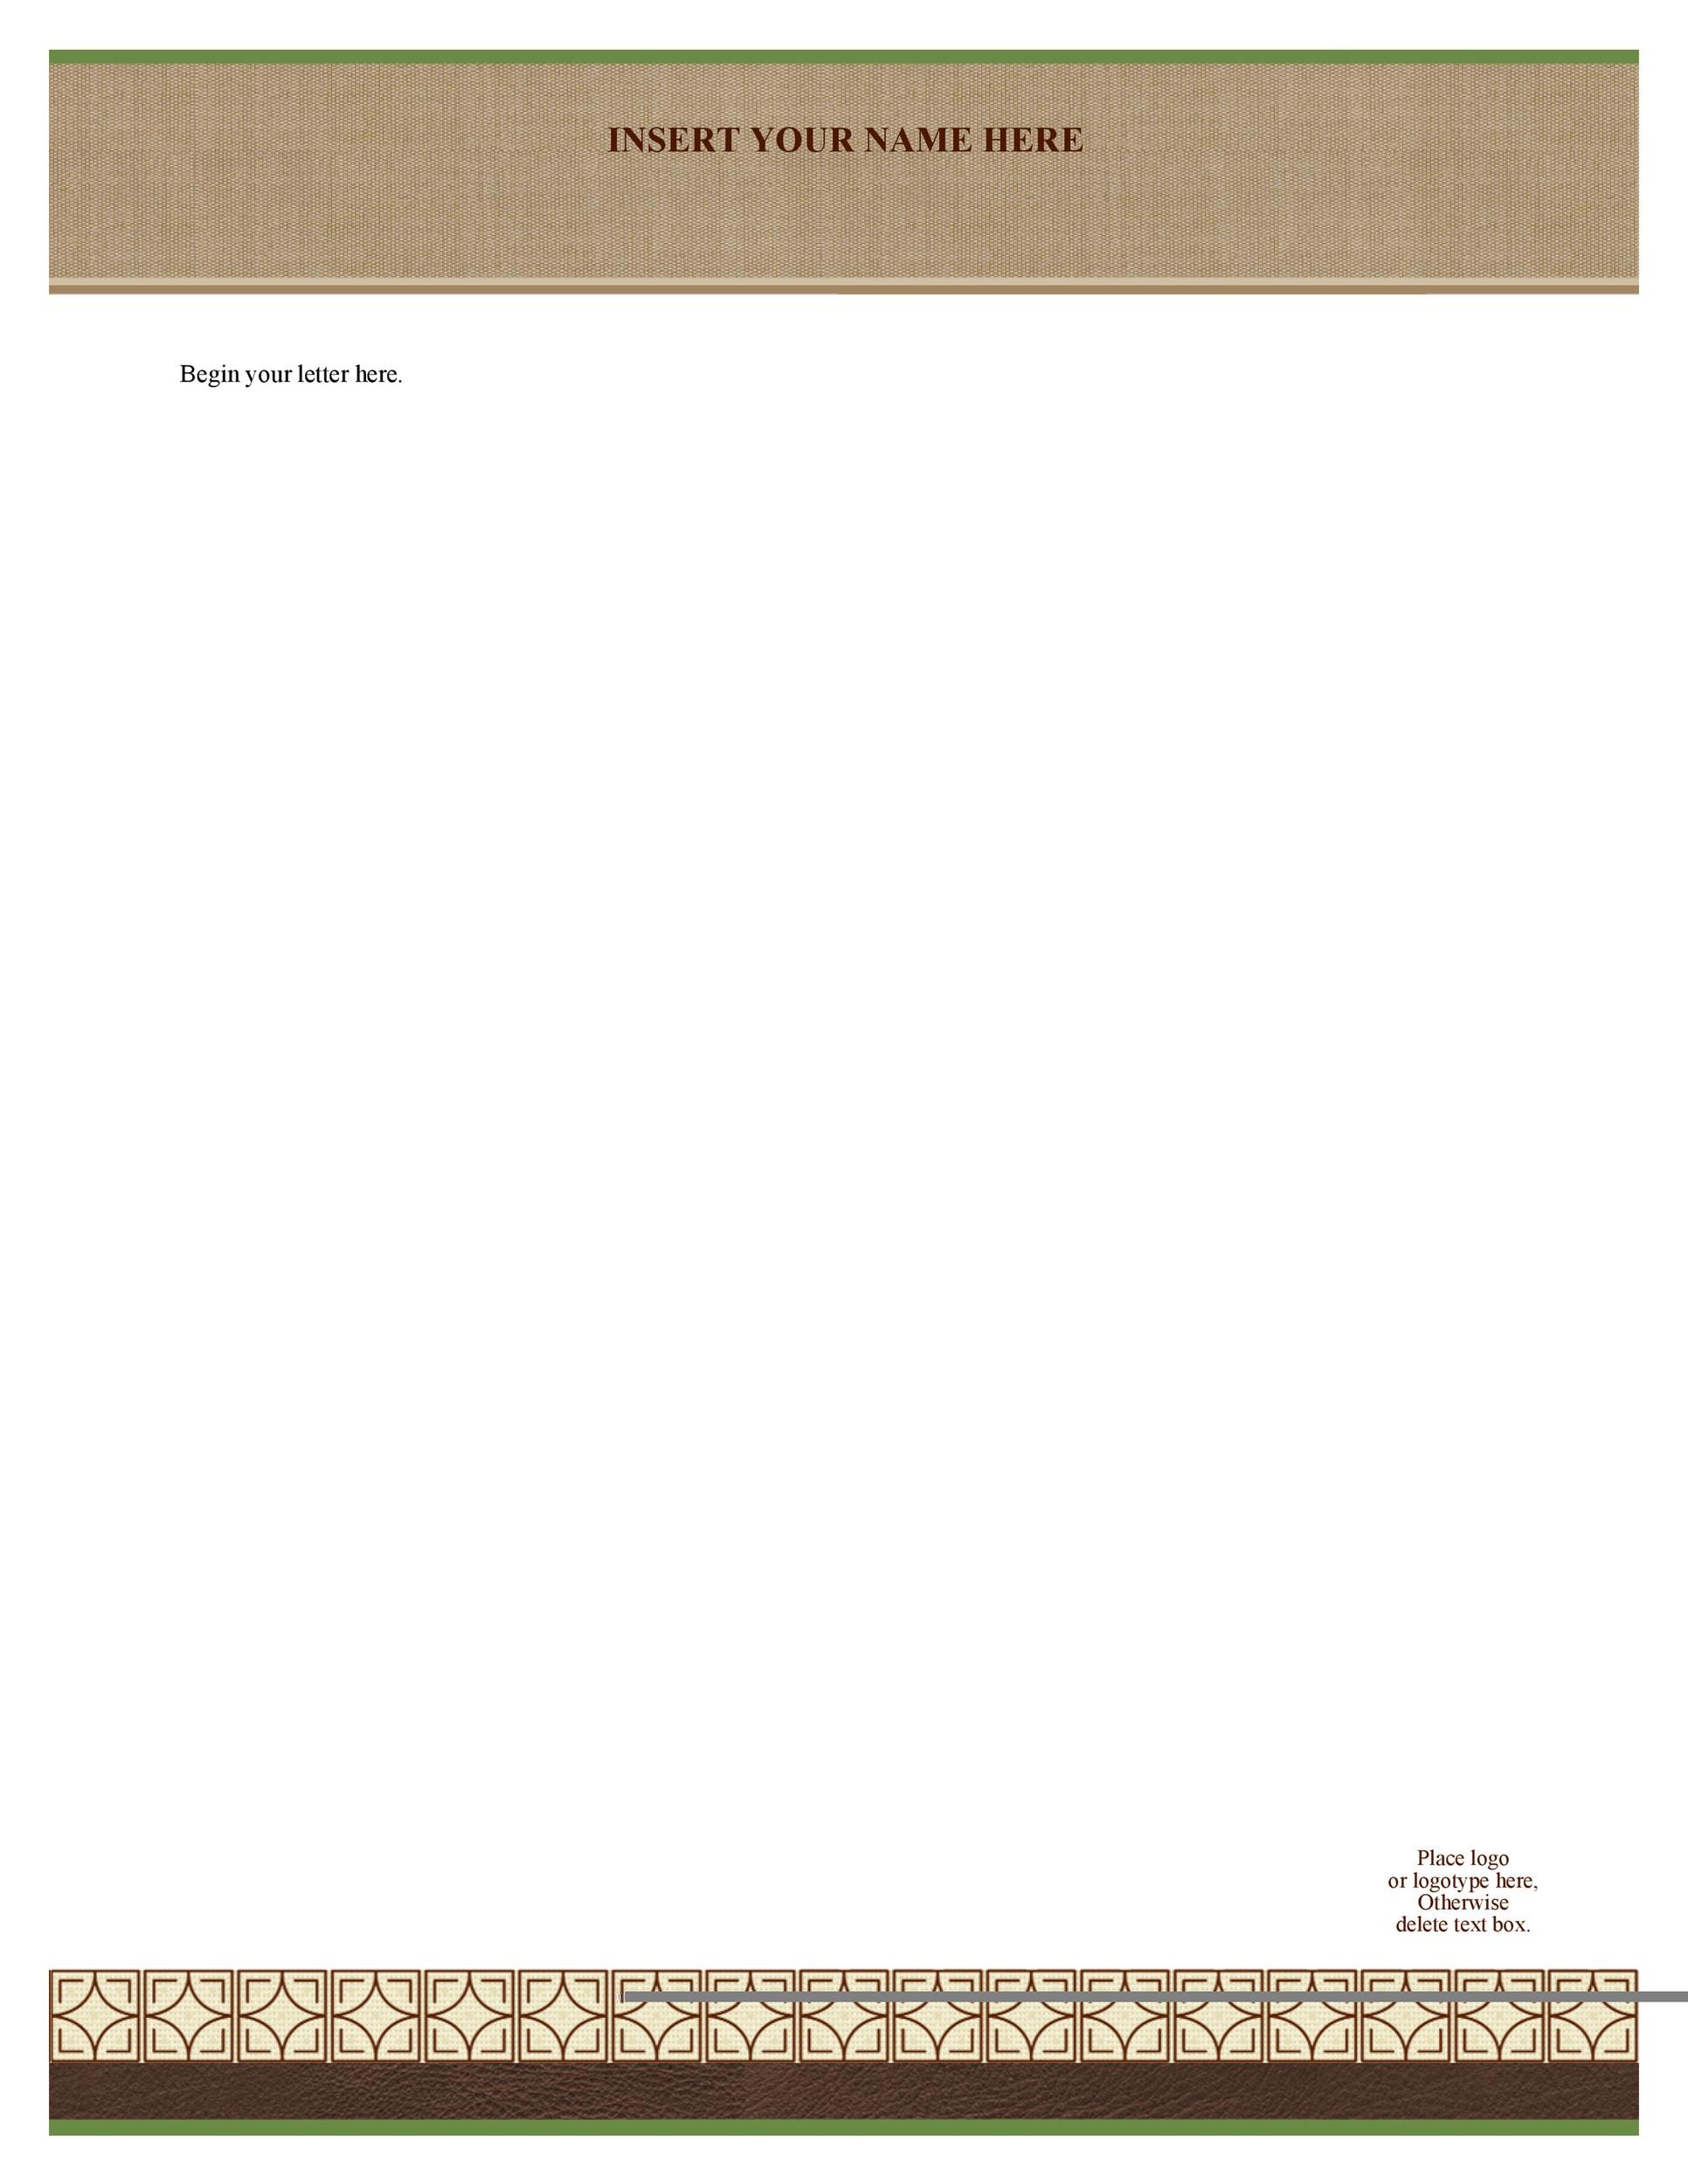 Downloadable Letterhead Template from templatelab.com